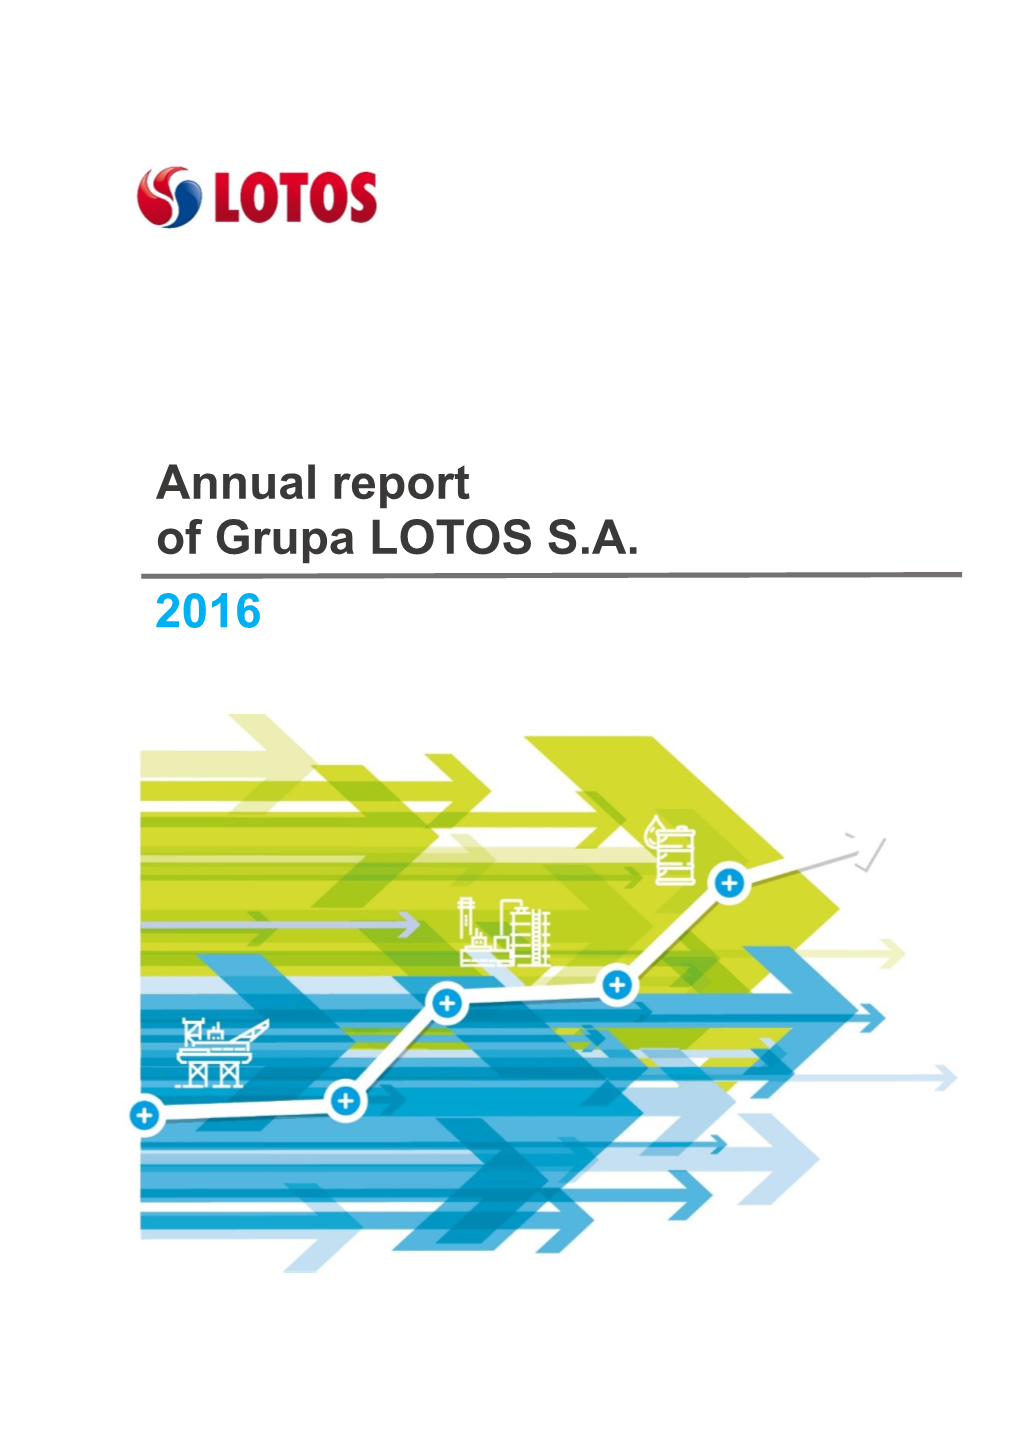 Annual Report of Grupa LOTOS S.A. 2016